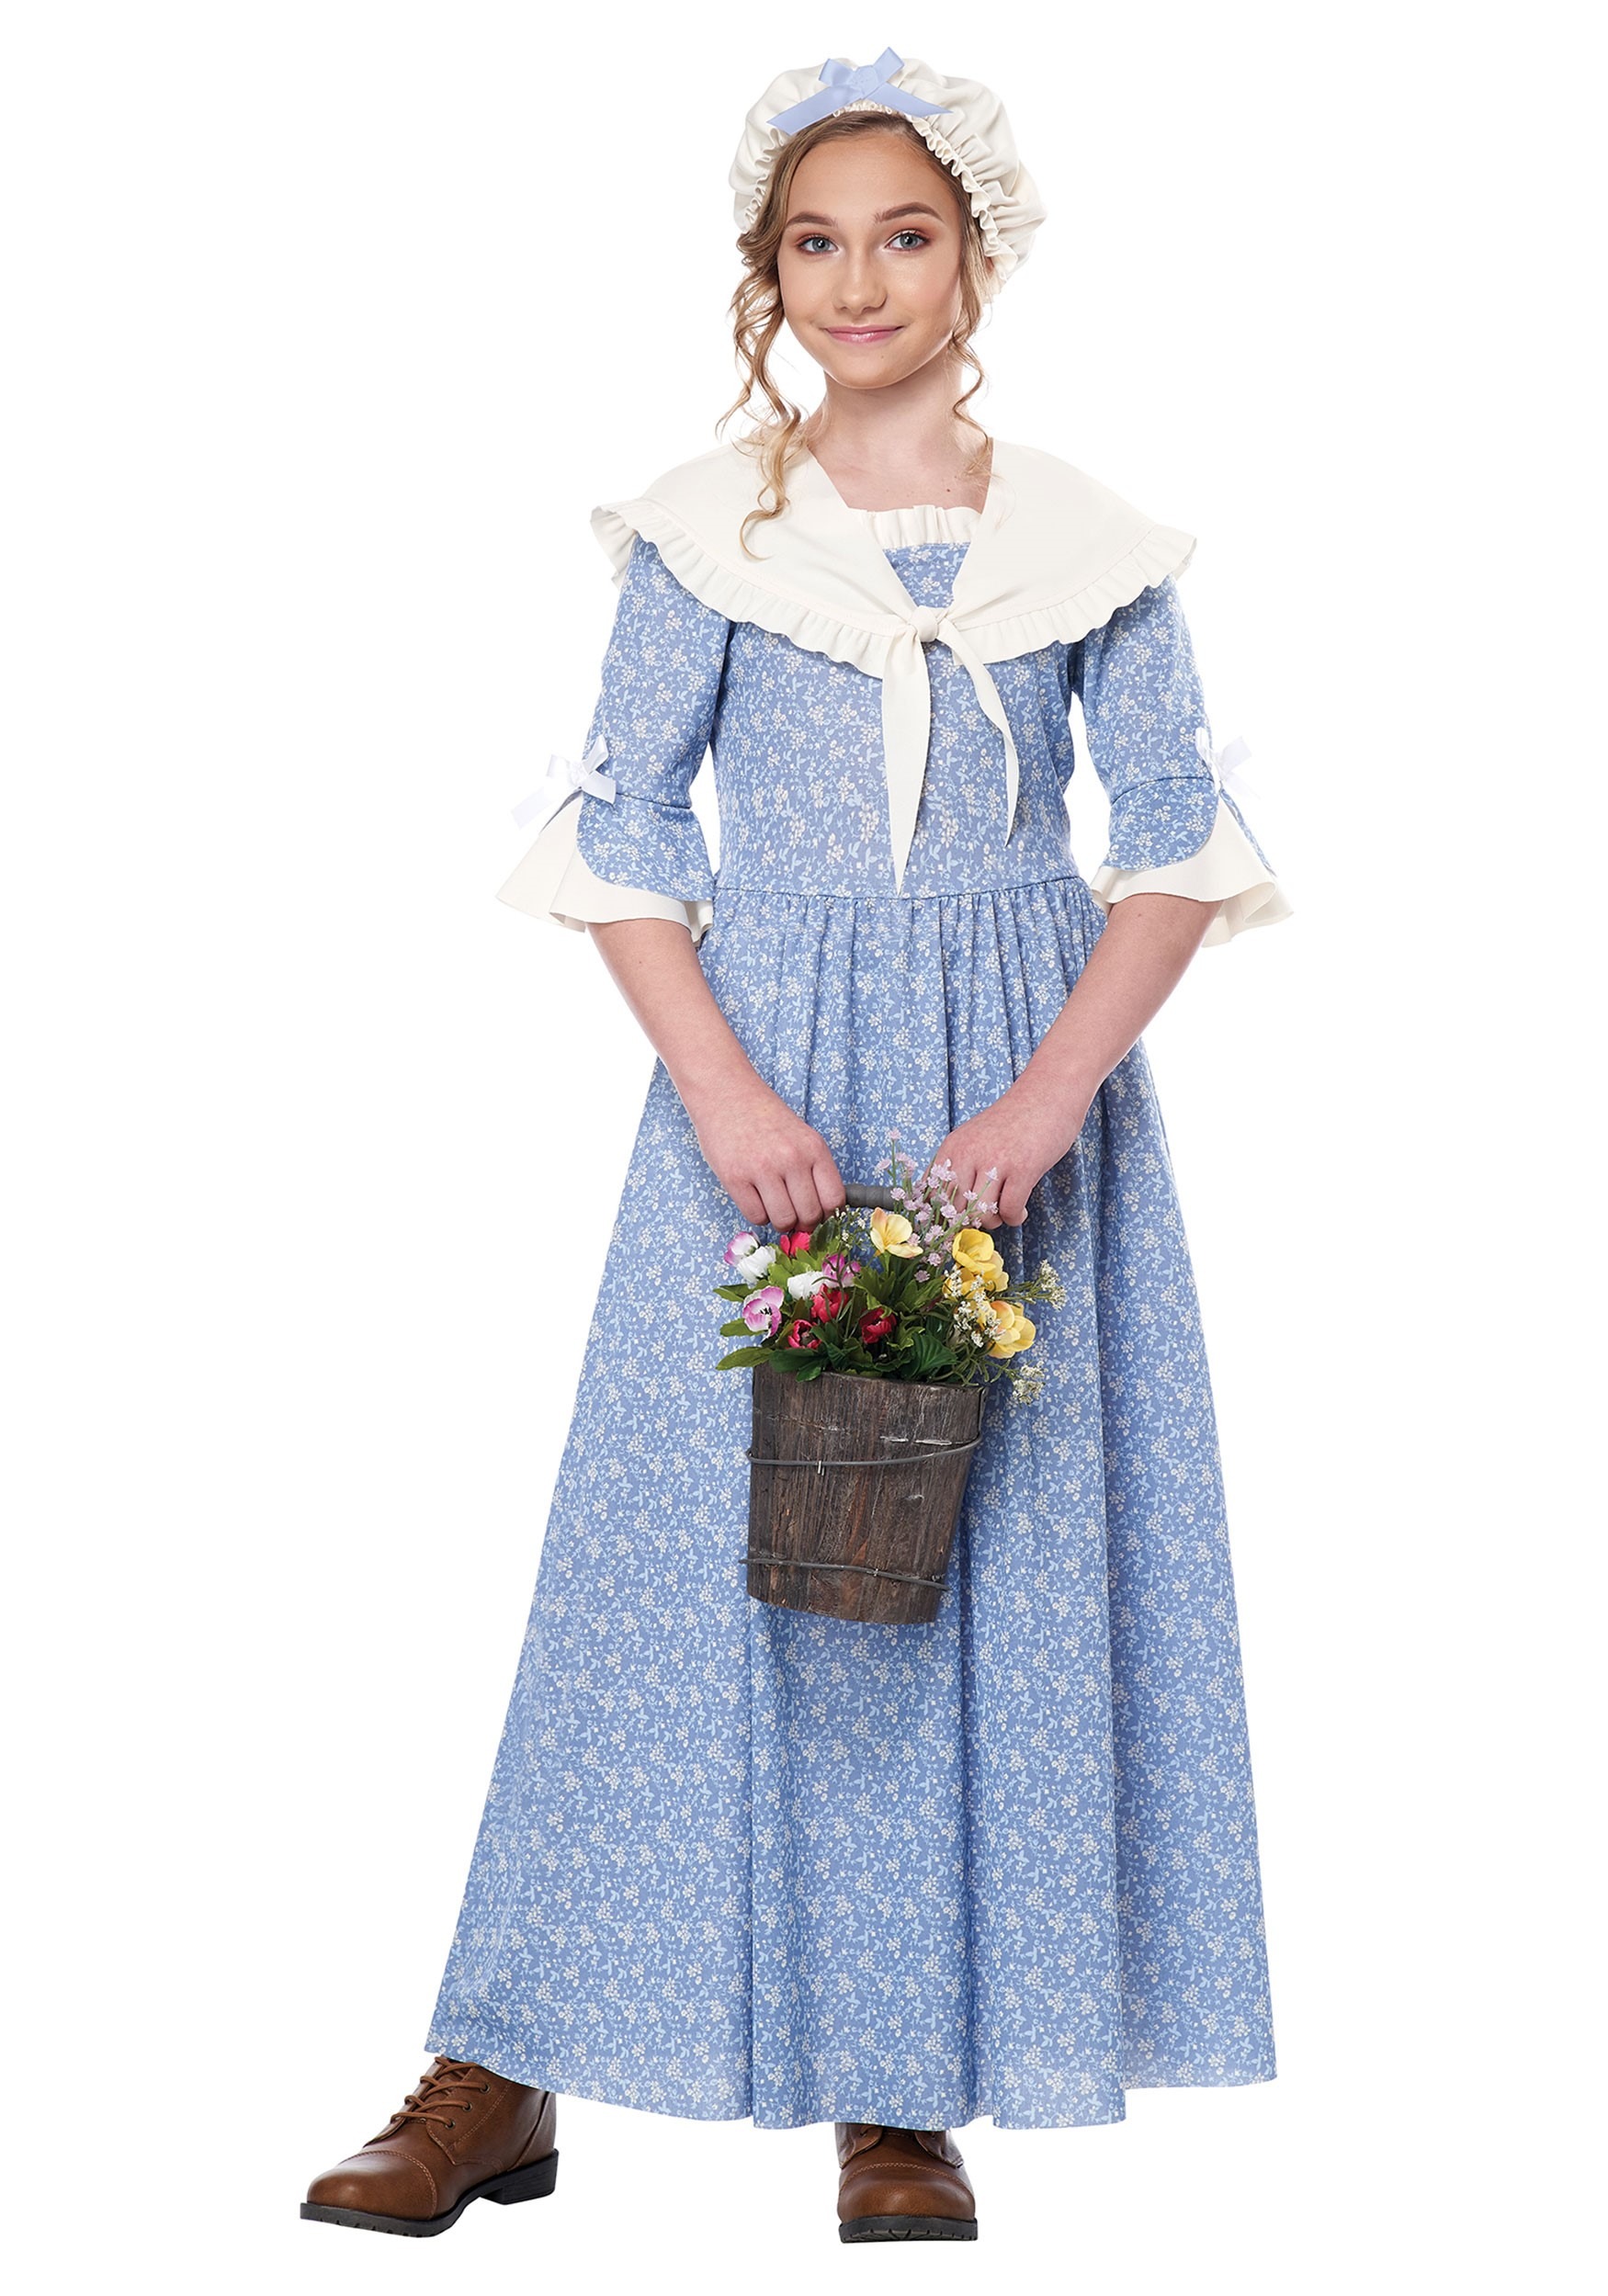 Kid’s Colonial Village Girl Costume